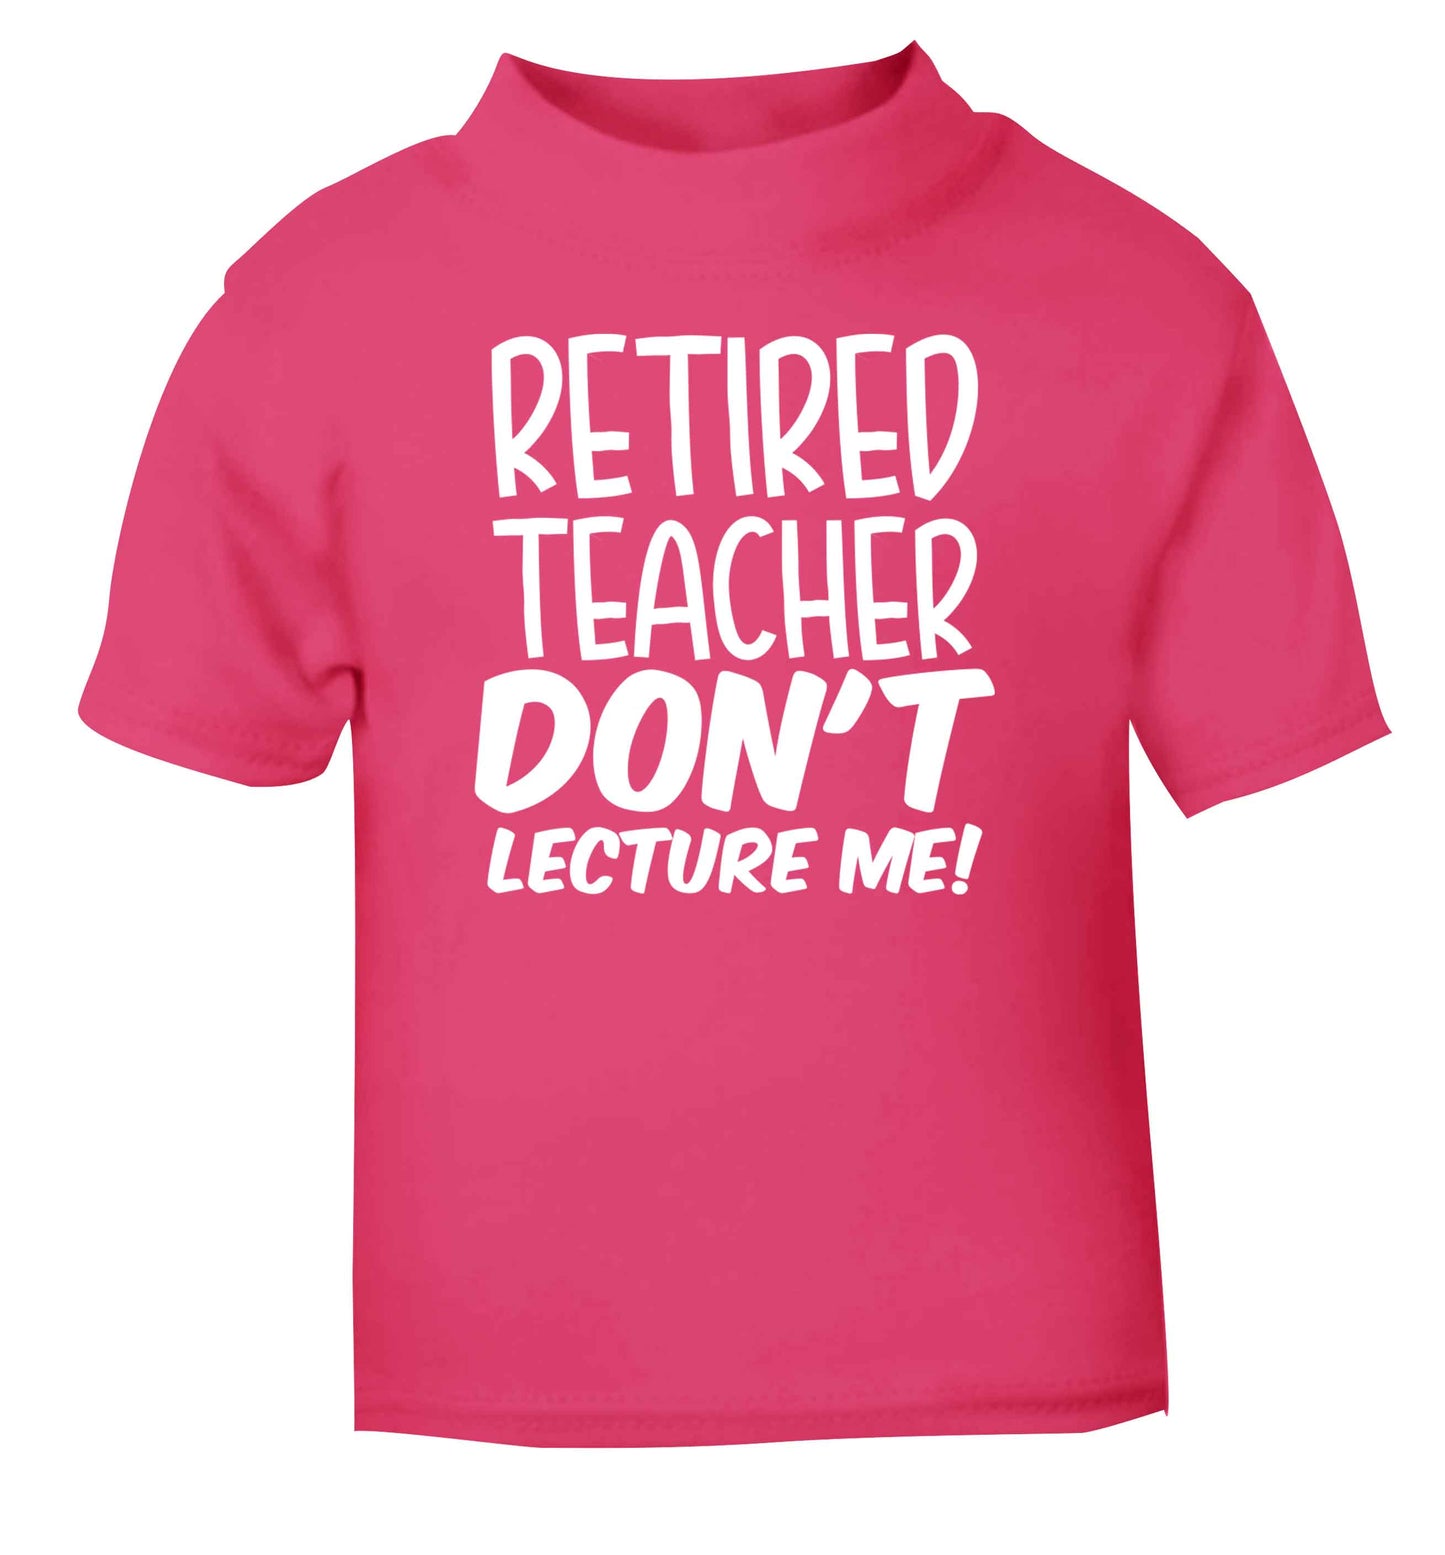 Retired teacher don't lecture me! pink Baby Toddler Tshirt 2 Years